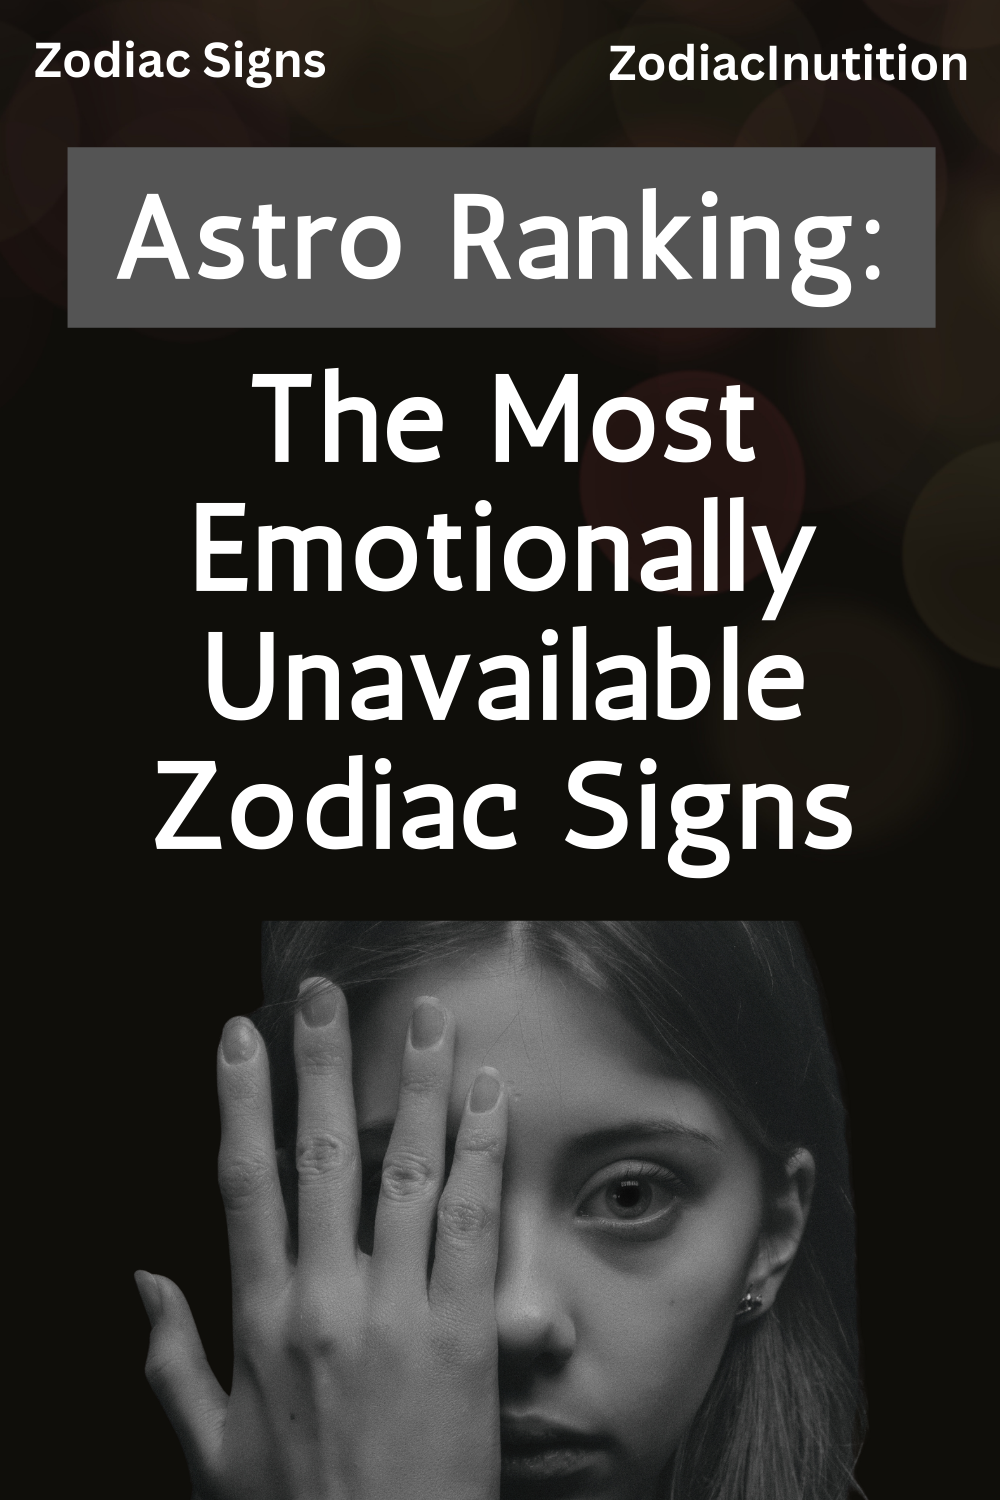 Astro Ranking: The Most Emotionally Unavailable Zodiac Signs